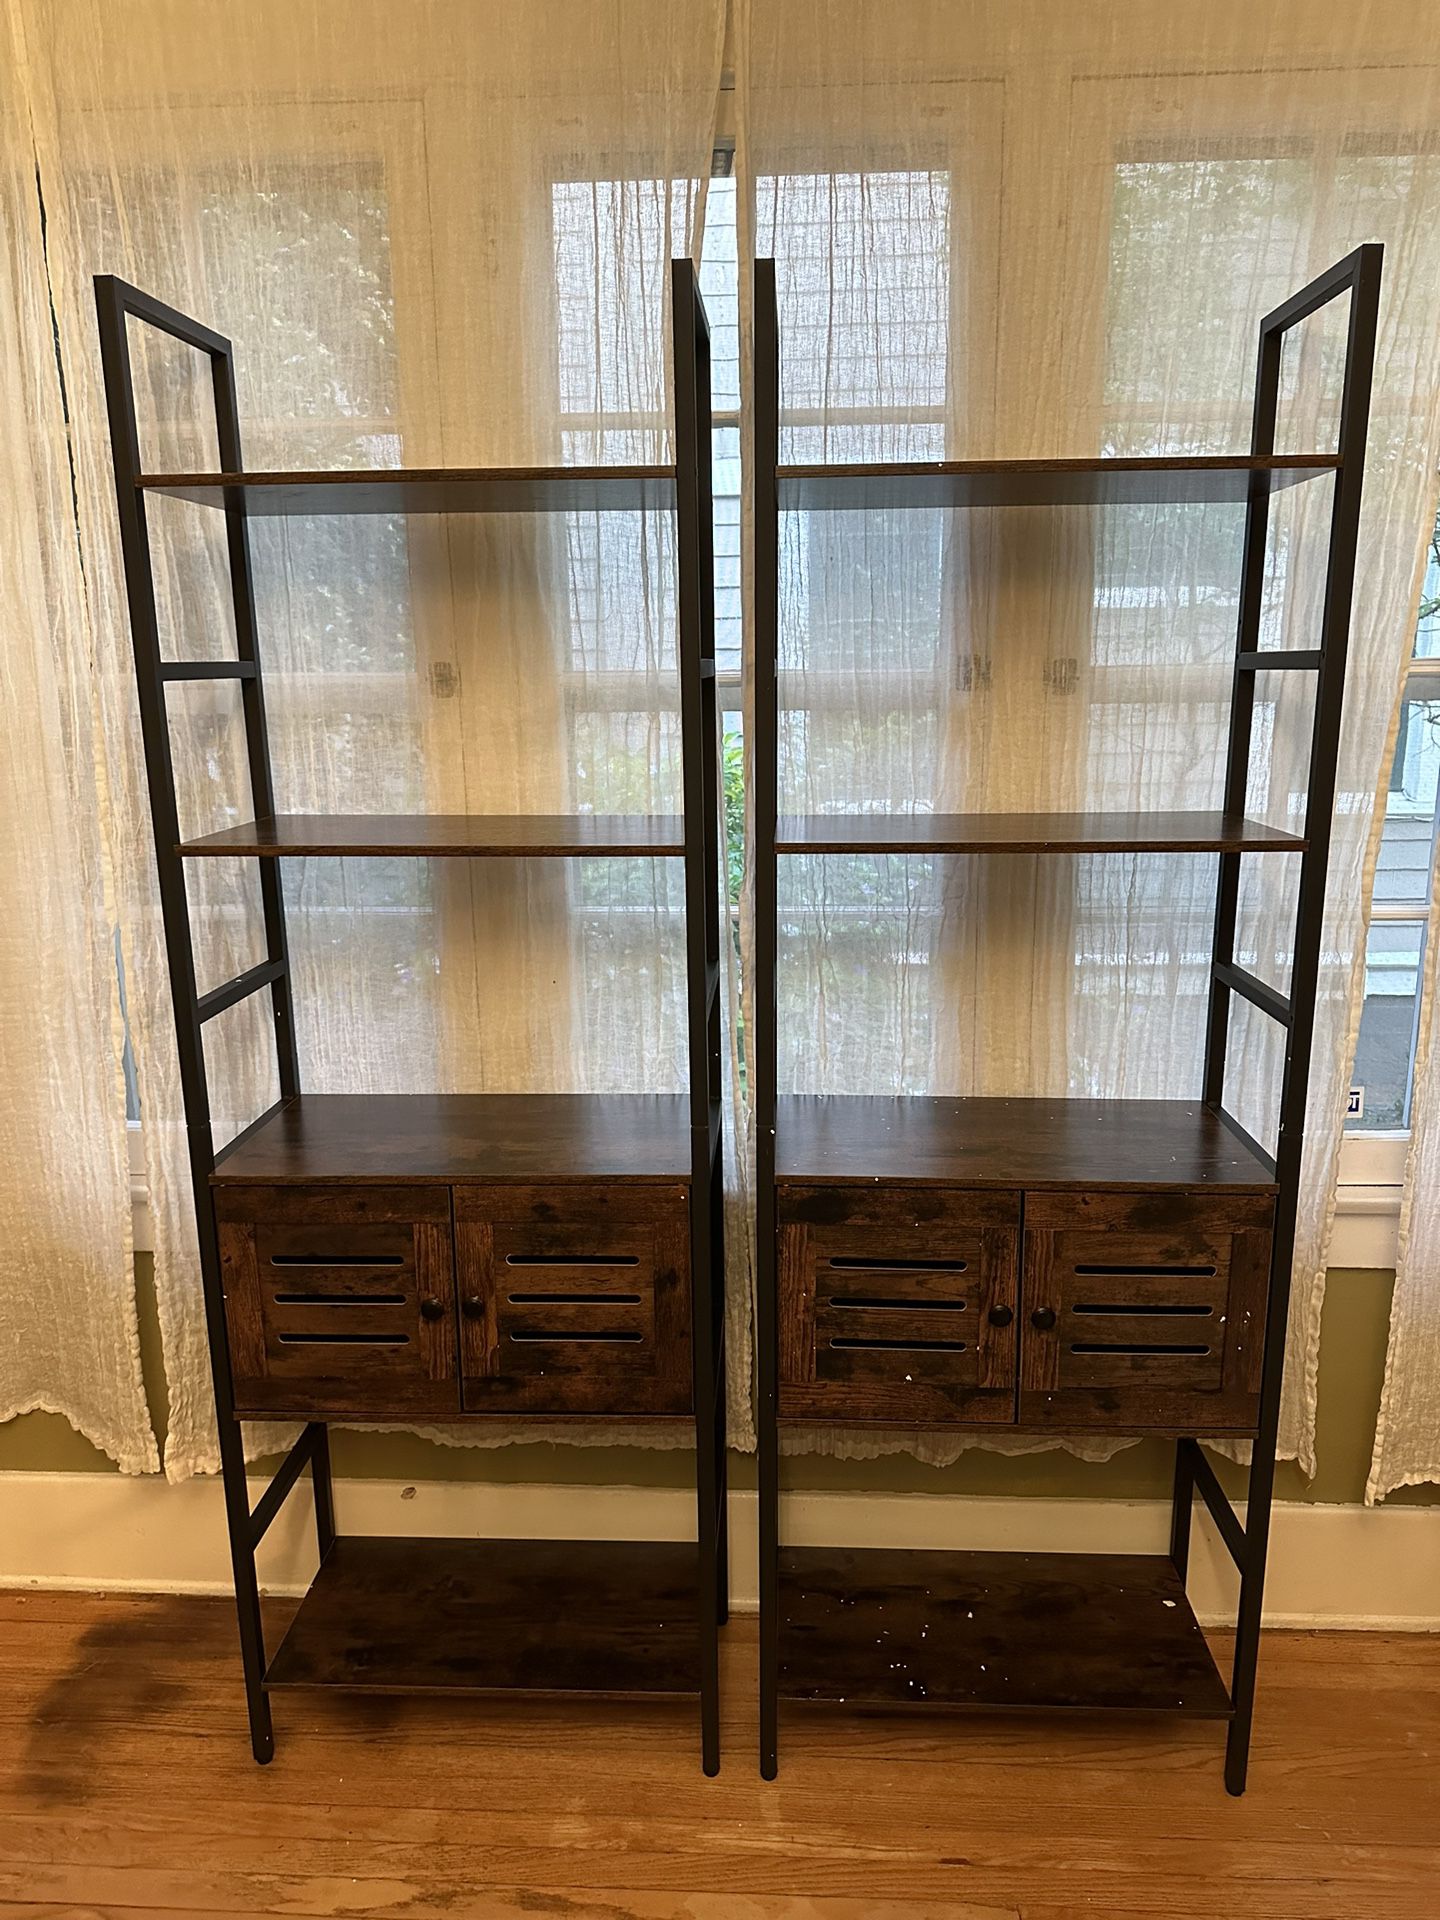 Pair Of Tall Cabinets